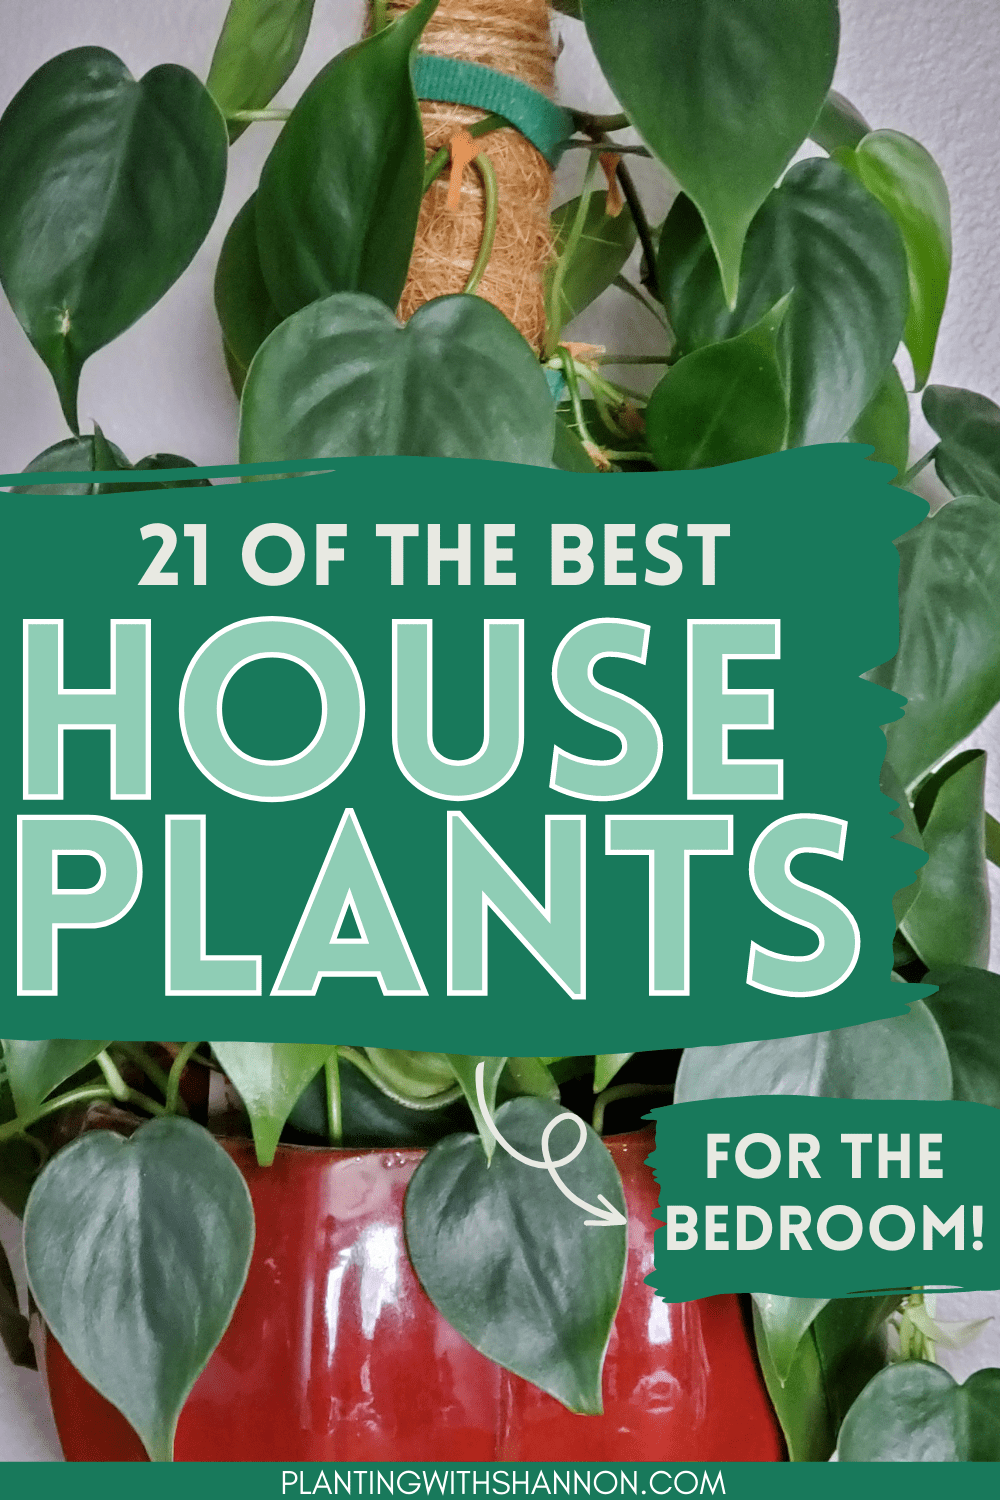 21 Best Plants To Keep In The Bedroom - Planting With Shannon